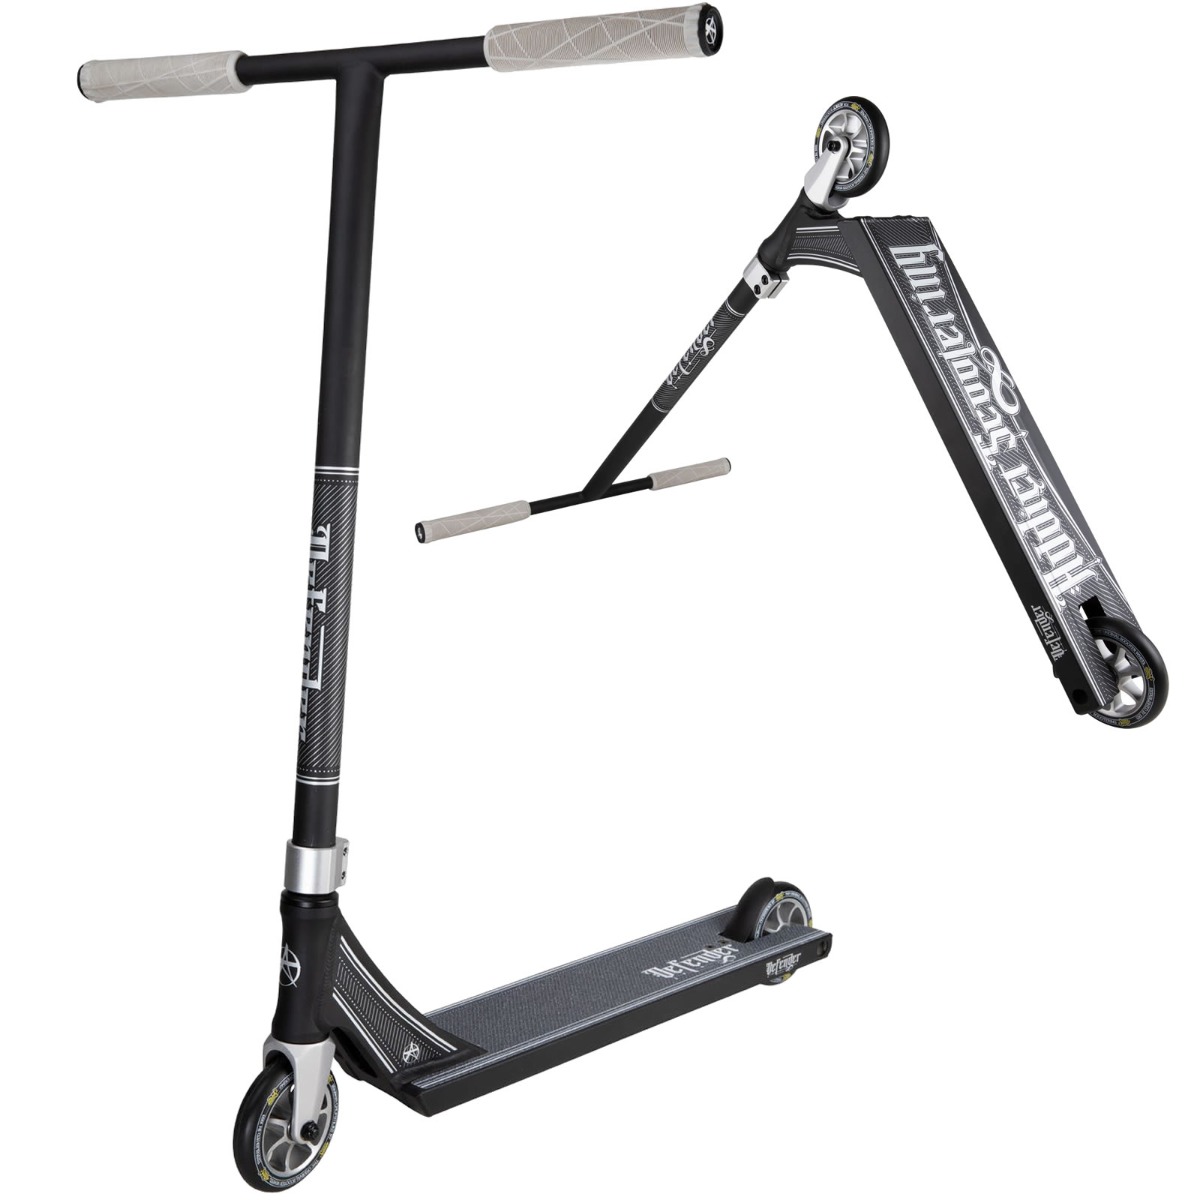 An image of Addict Defender 3.0 Pro Stunt Scooter - Black / Silver